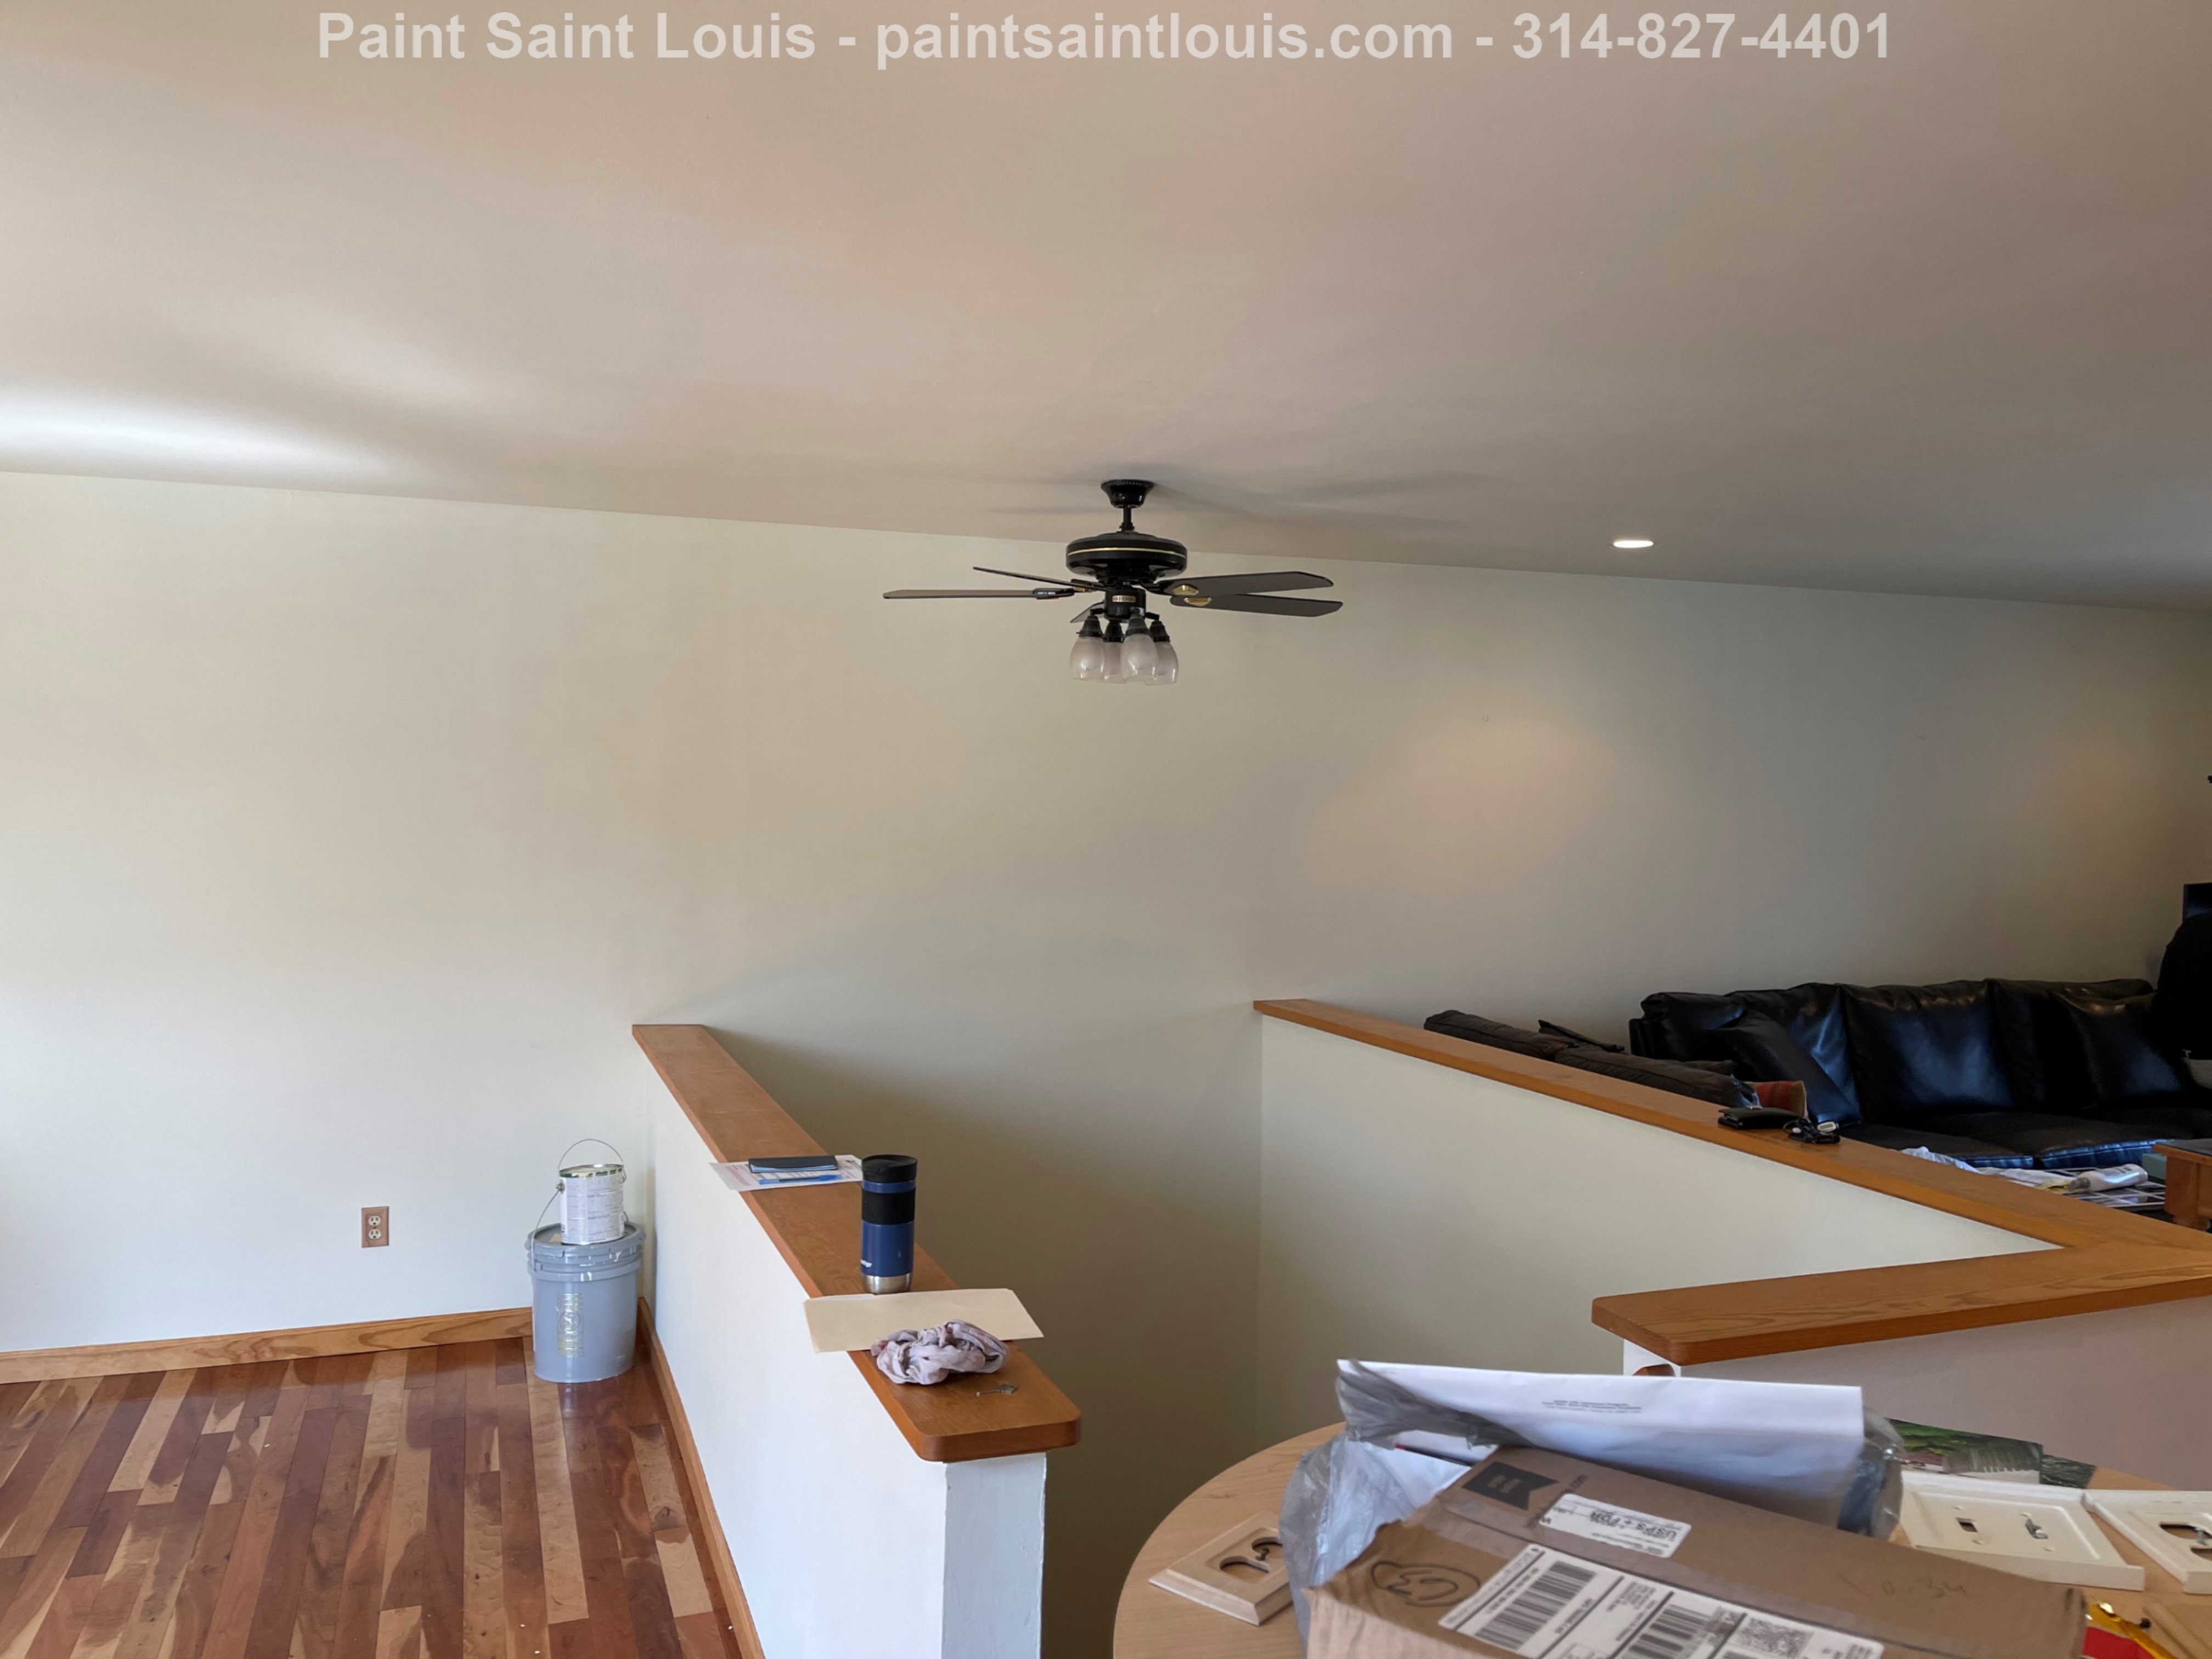 Painting walls and ceilings in Ballwin, MO. (after)